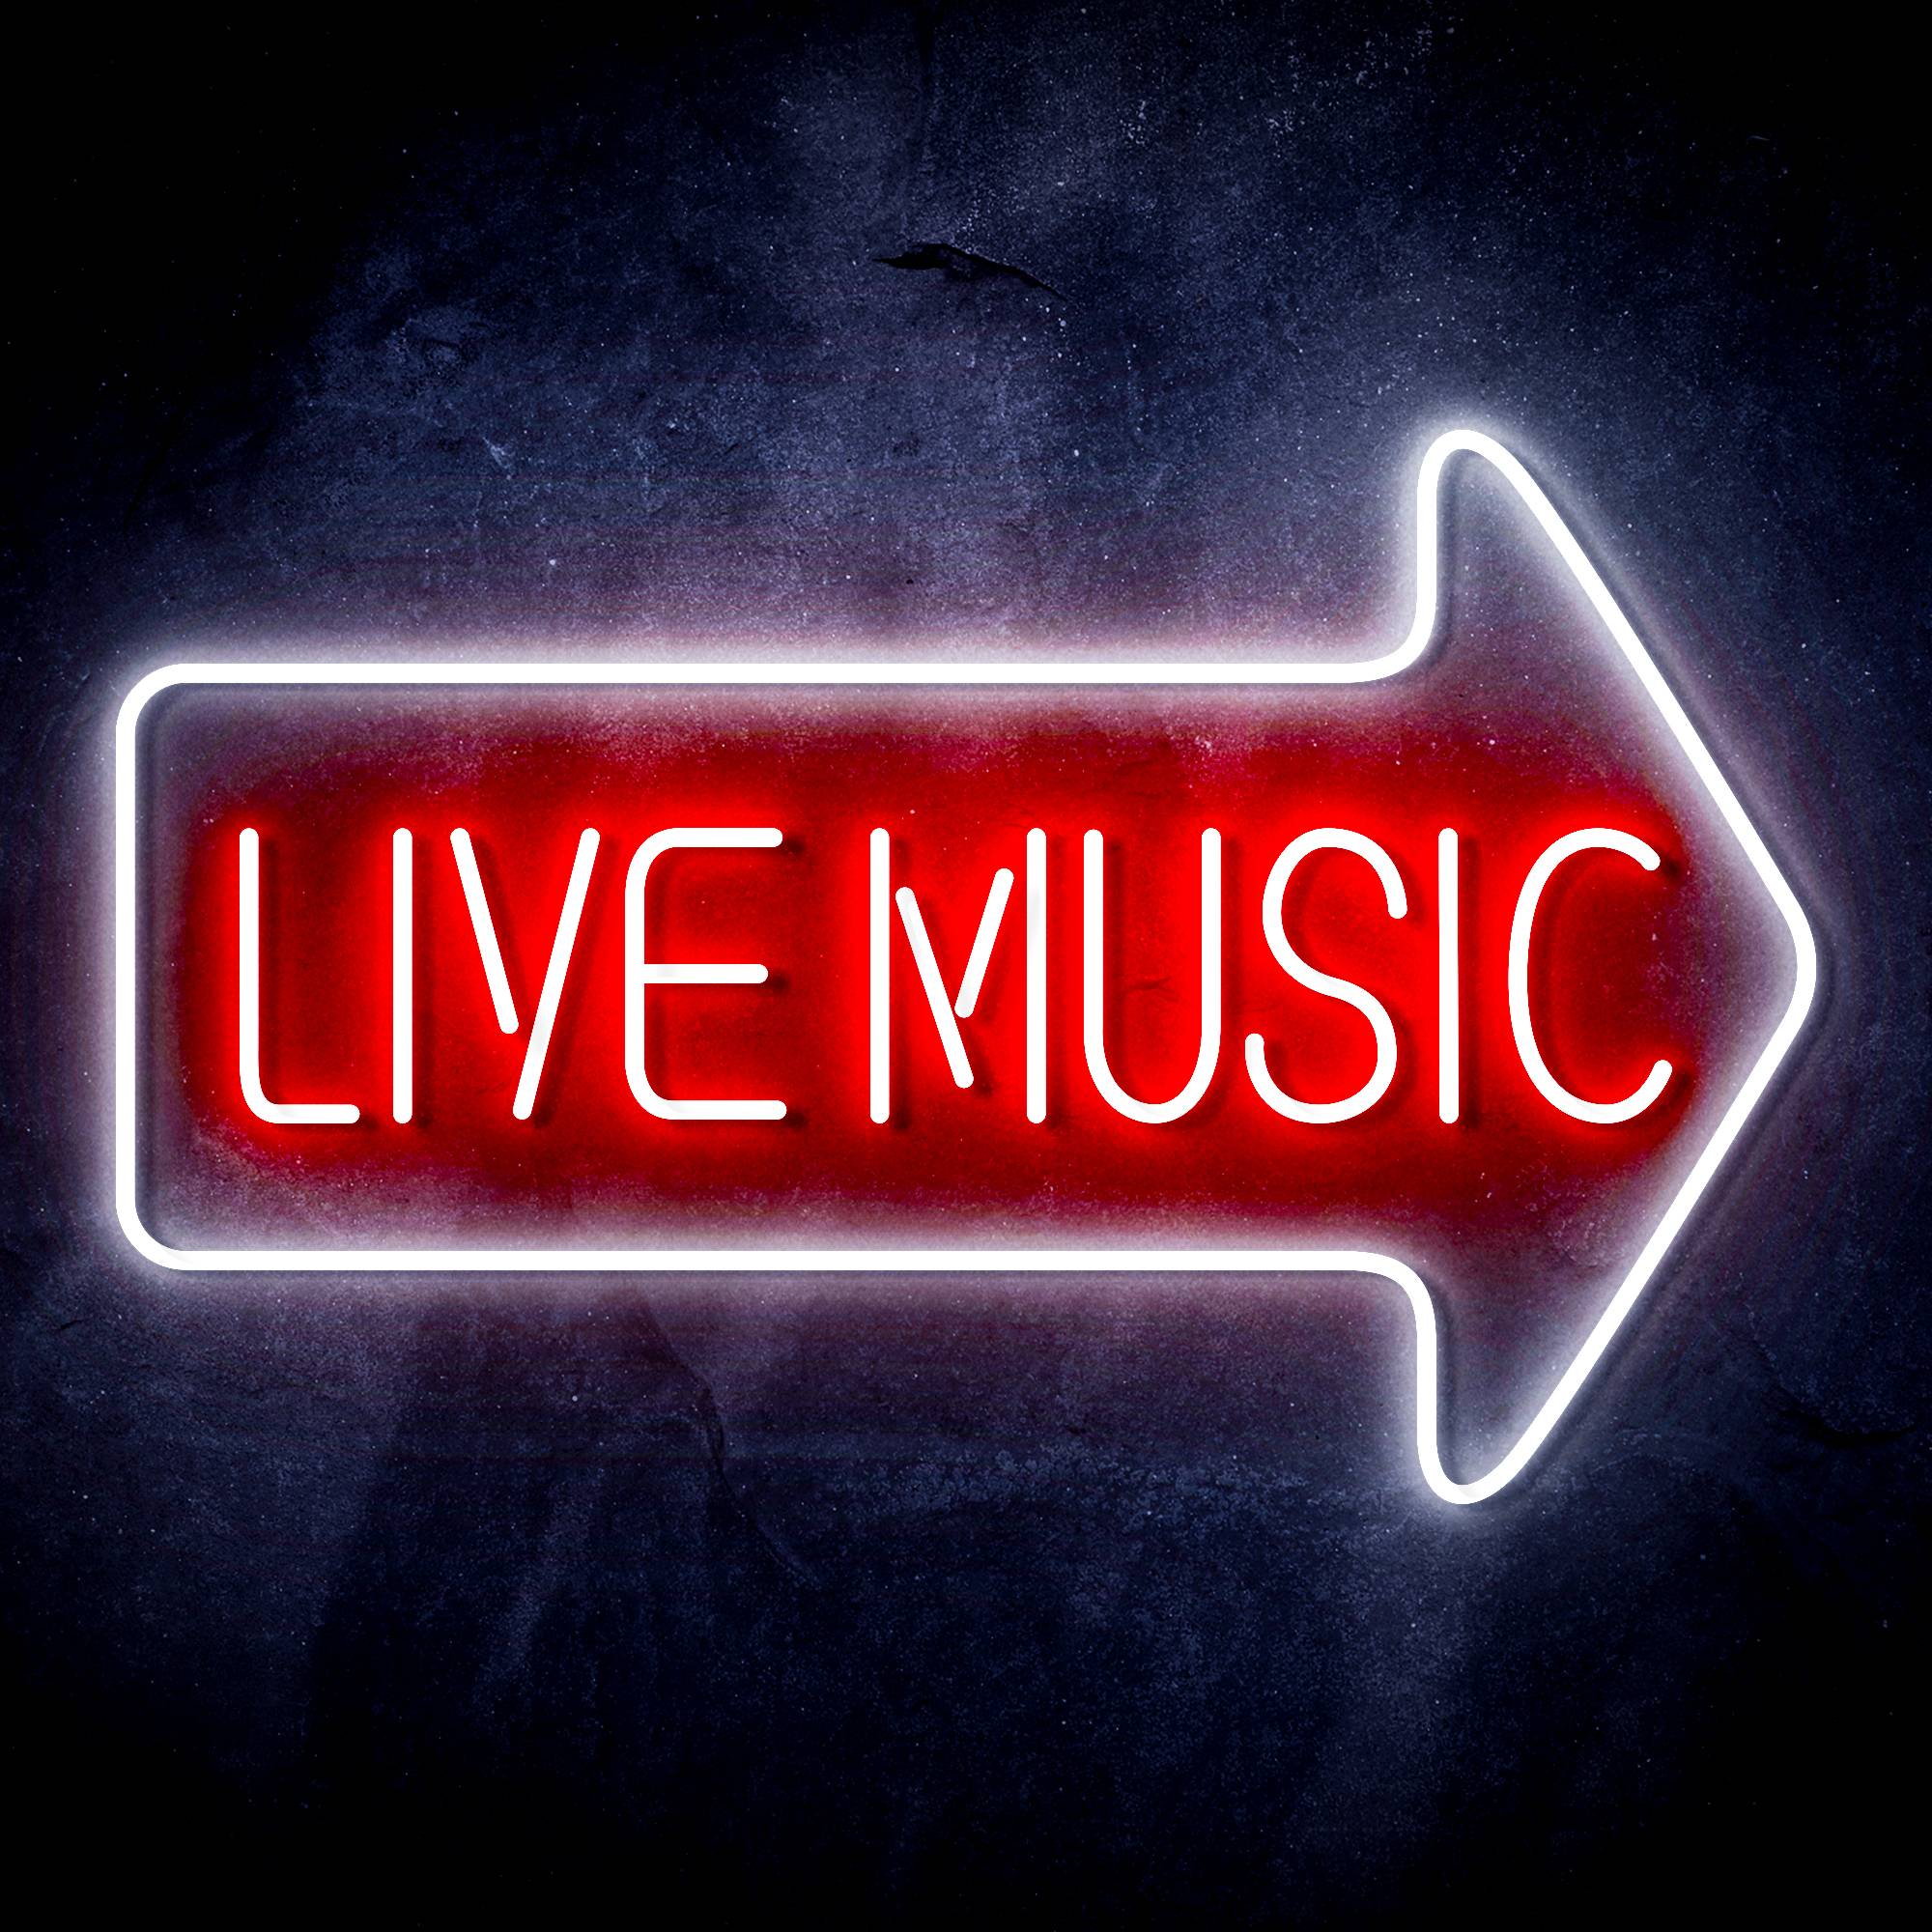 Live music with arrow LED Neon Sign